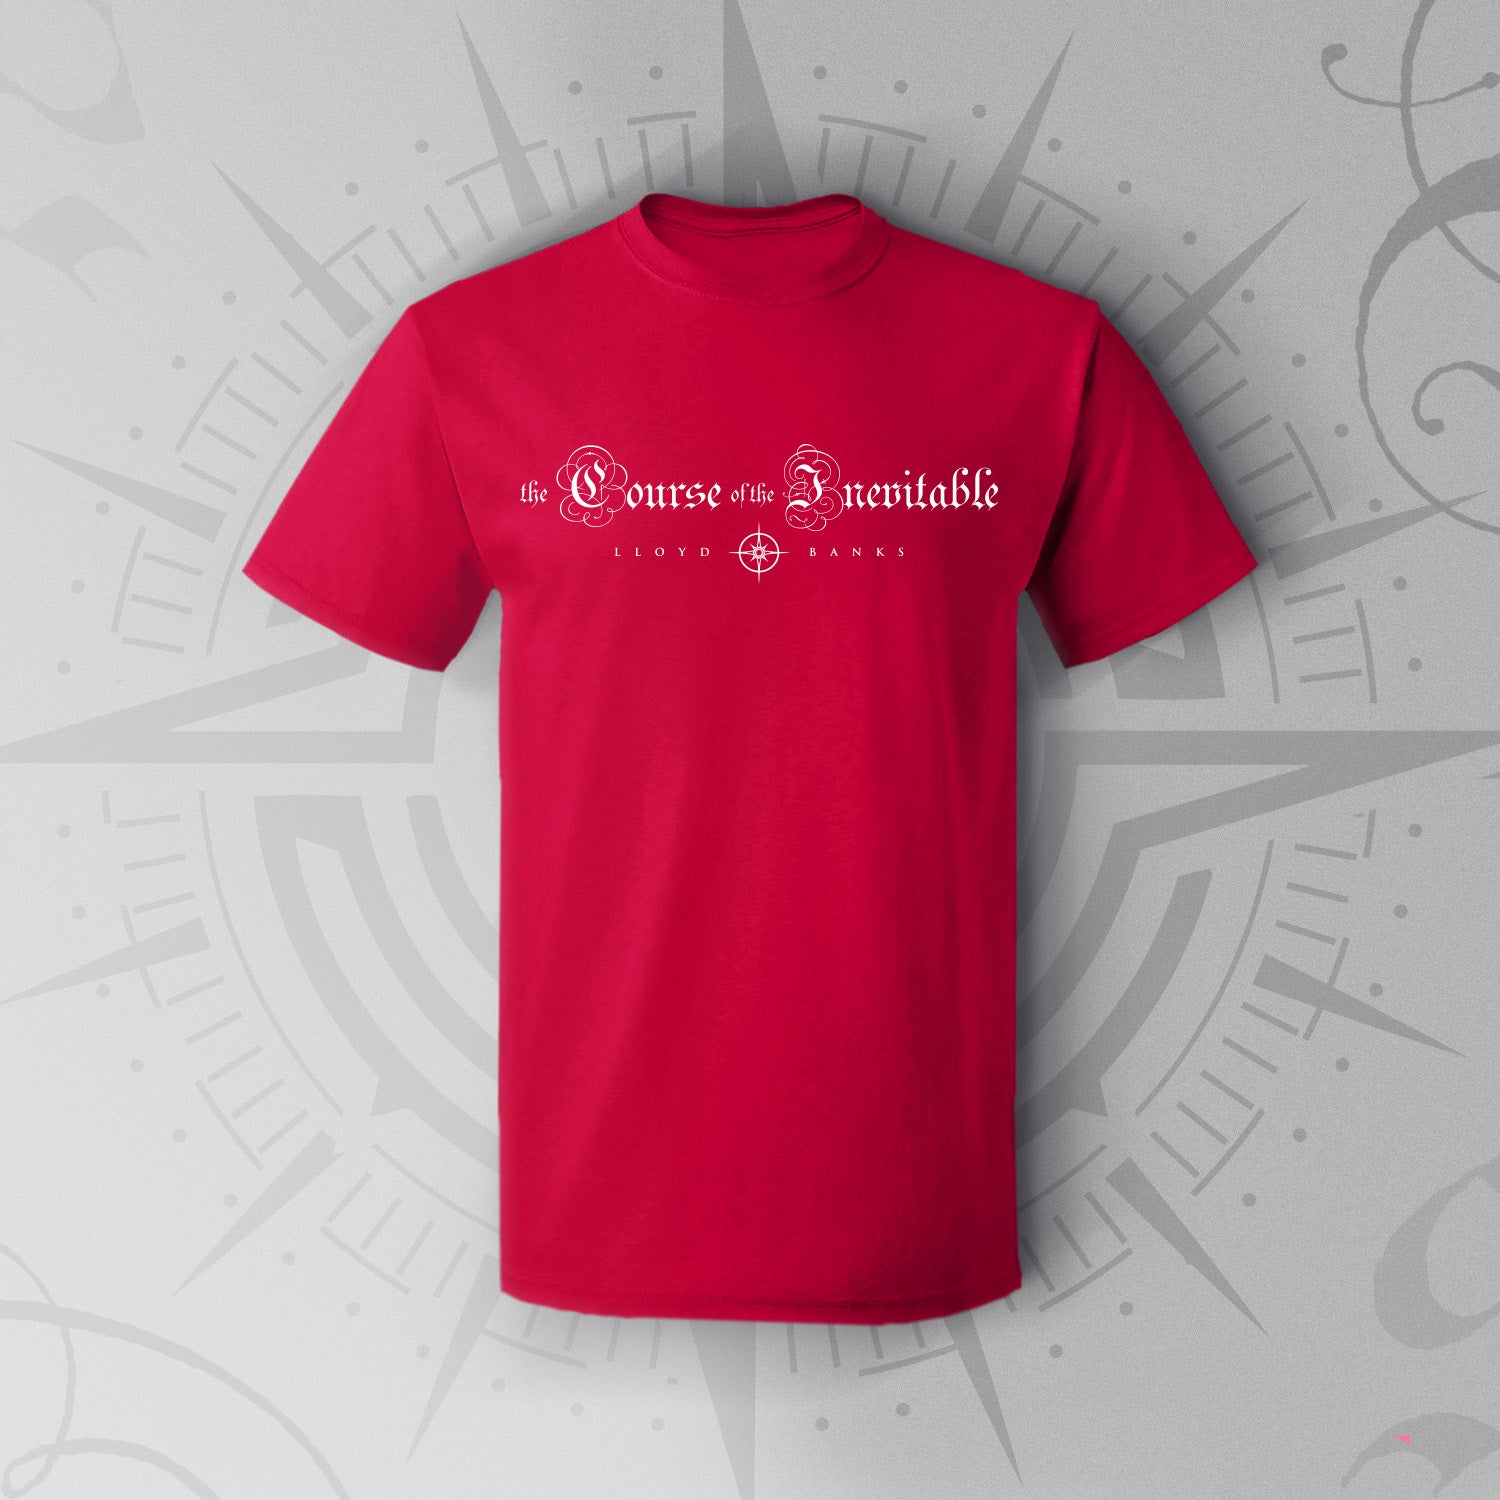 COTI Cardinal Red T-Shirt – BVNKVAULT - Official Lloyd Banks Store